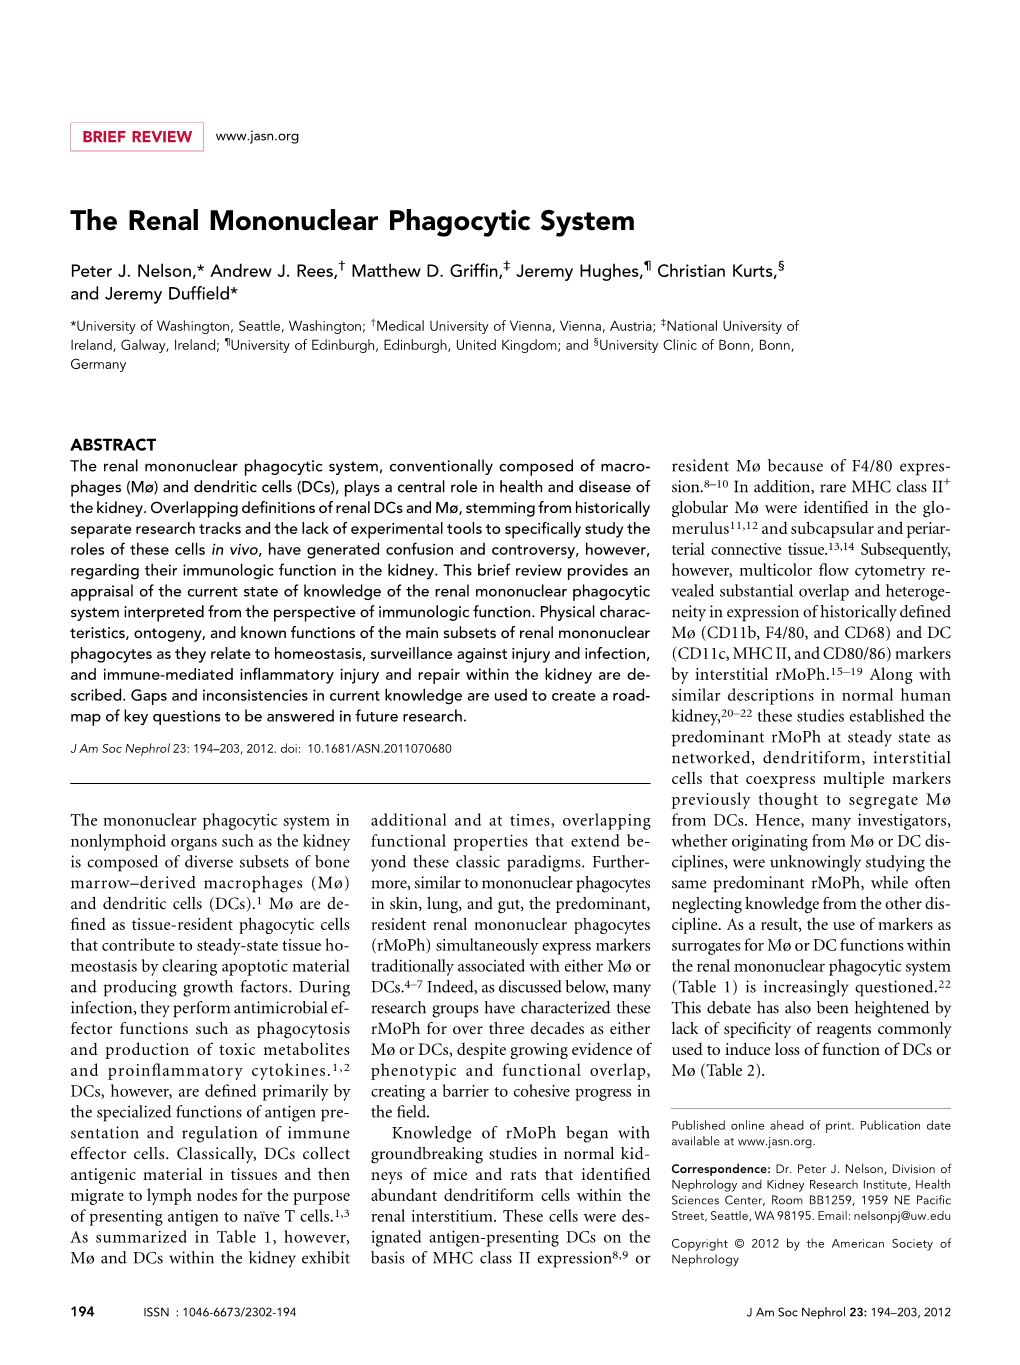 The Renal Mononuclear Phagocytic System